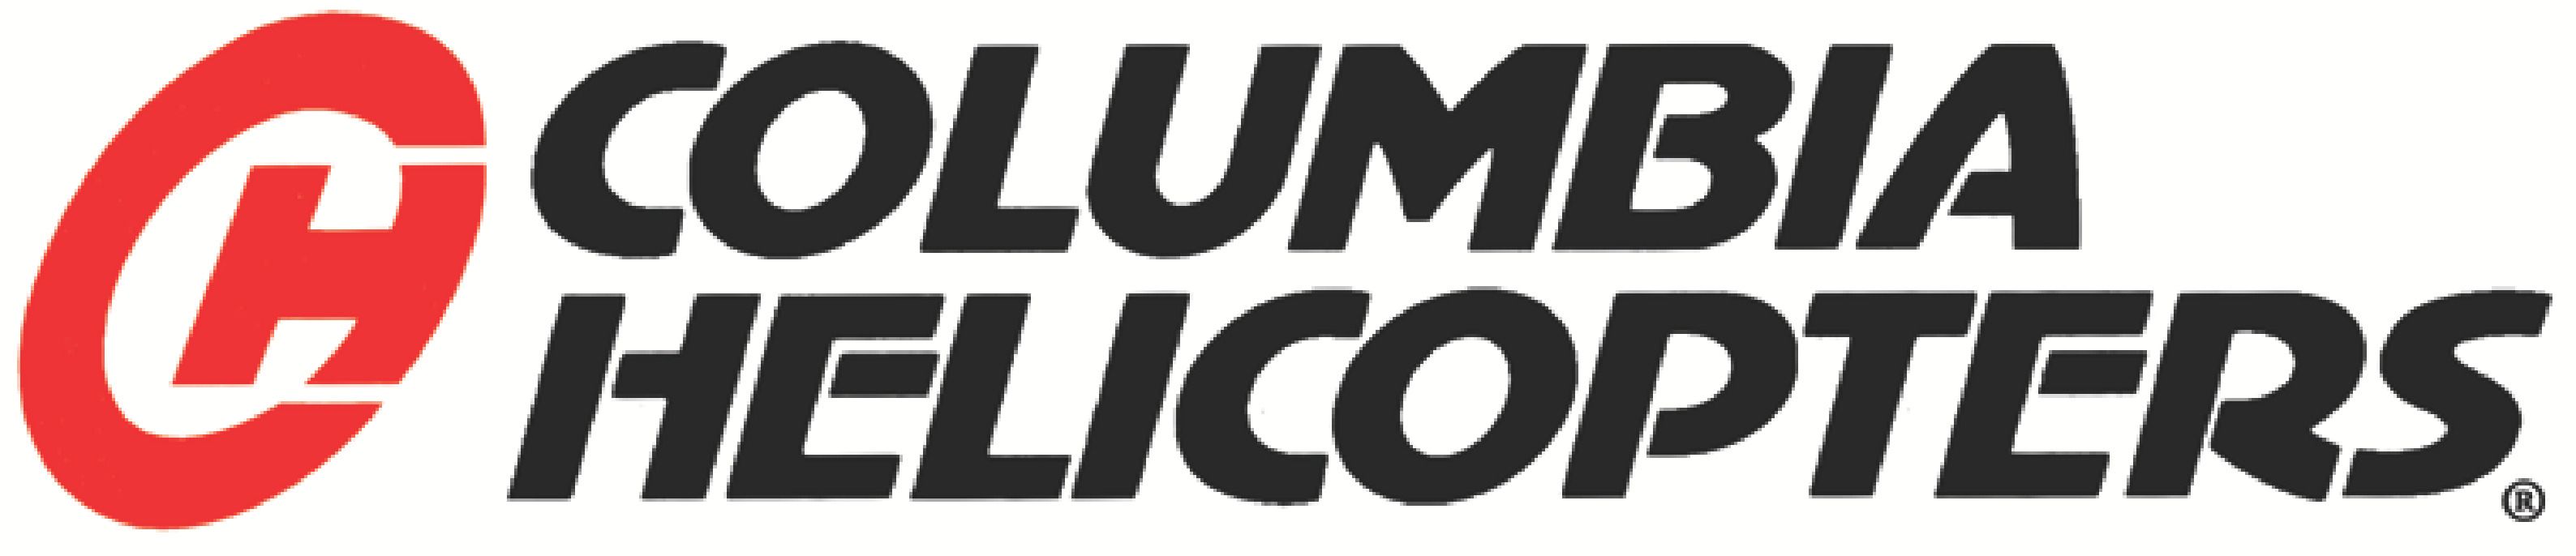 Columbia Helicopters, Inc